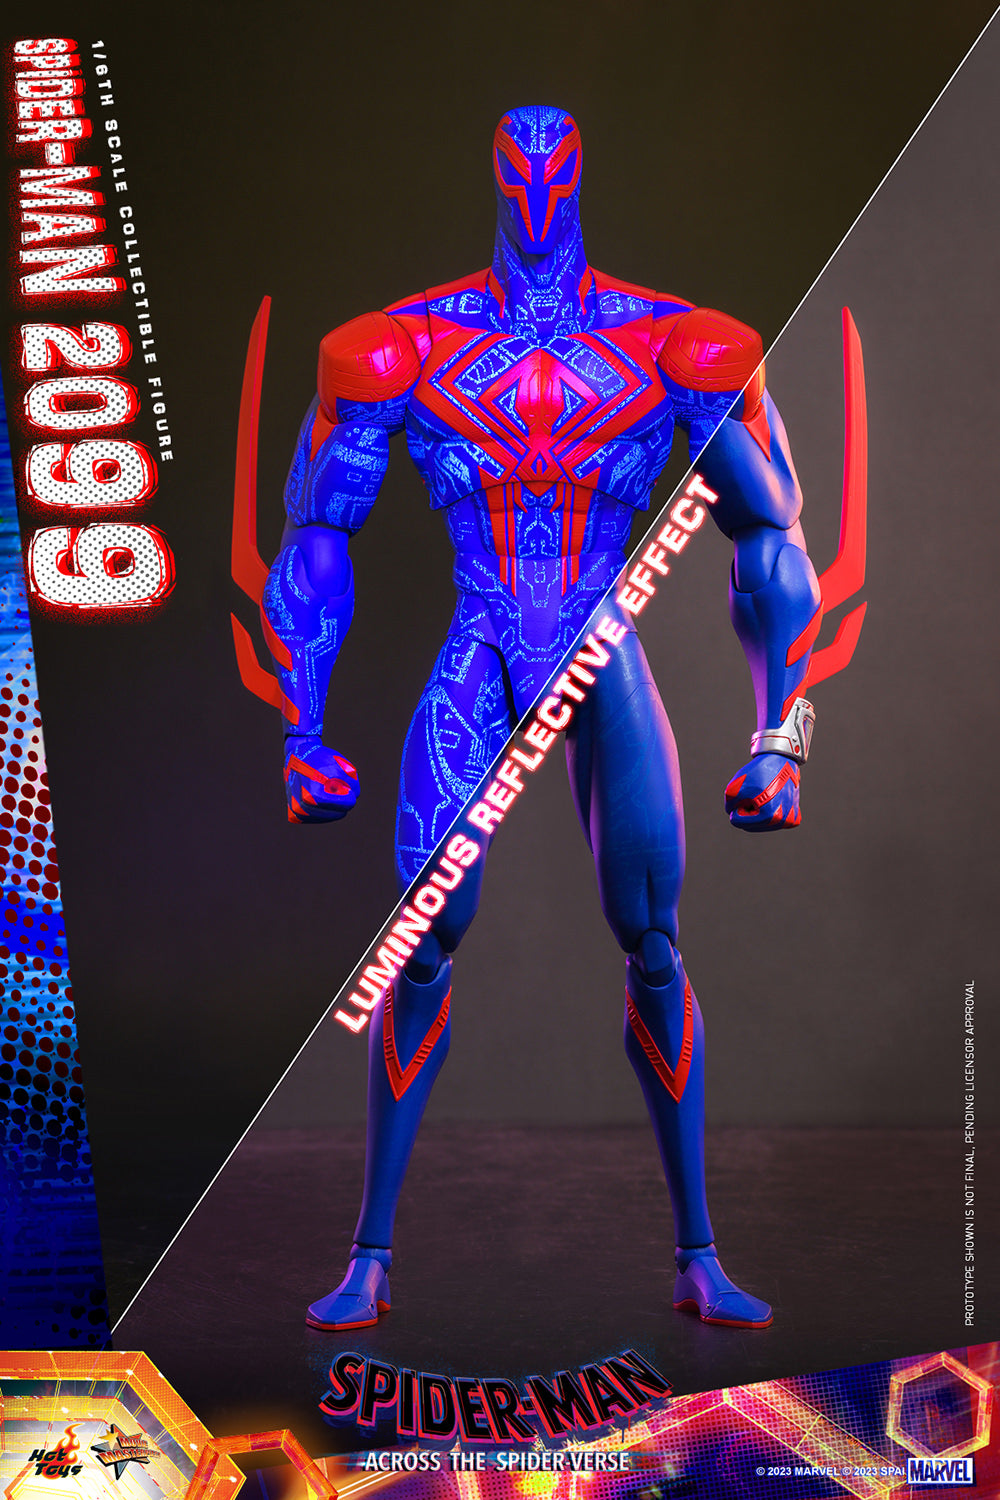 Spider-Man 2099 1/6 Scale Figure by Hot Toys